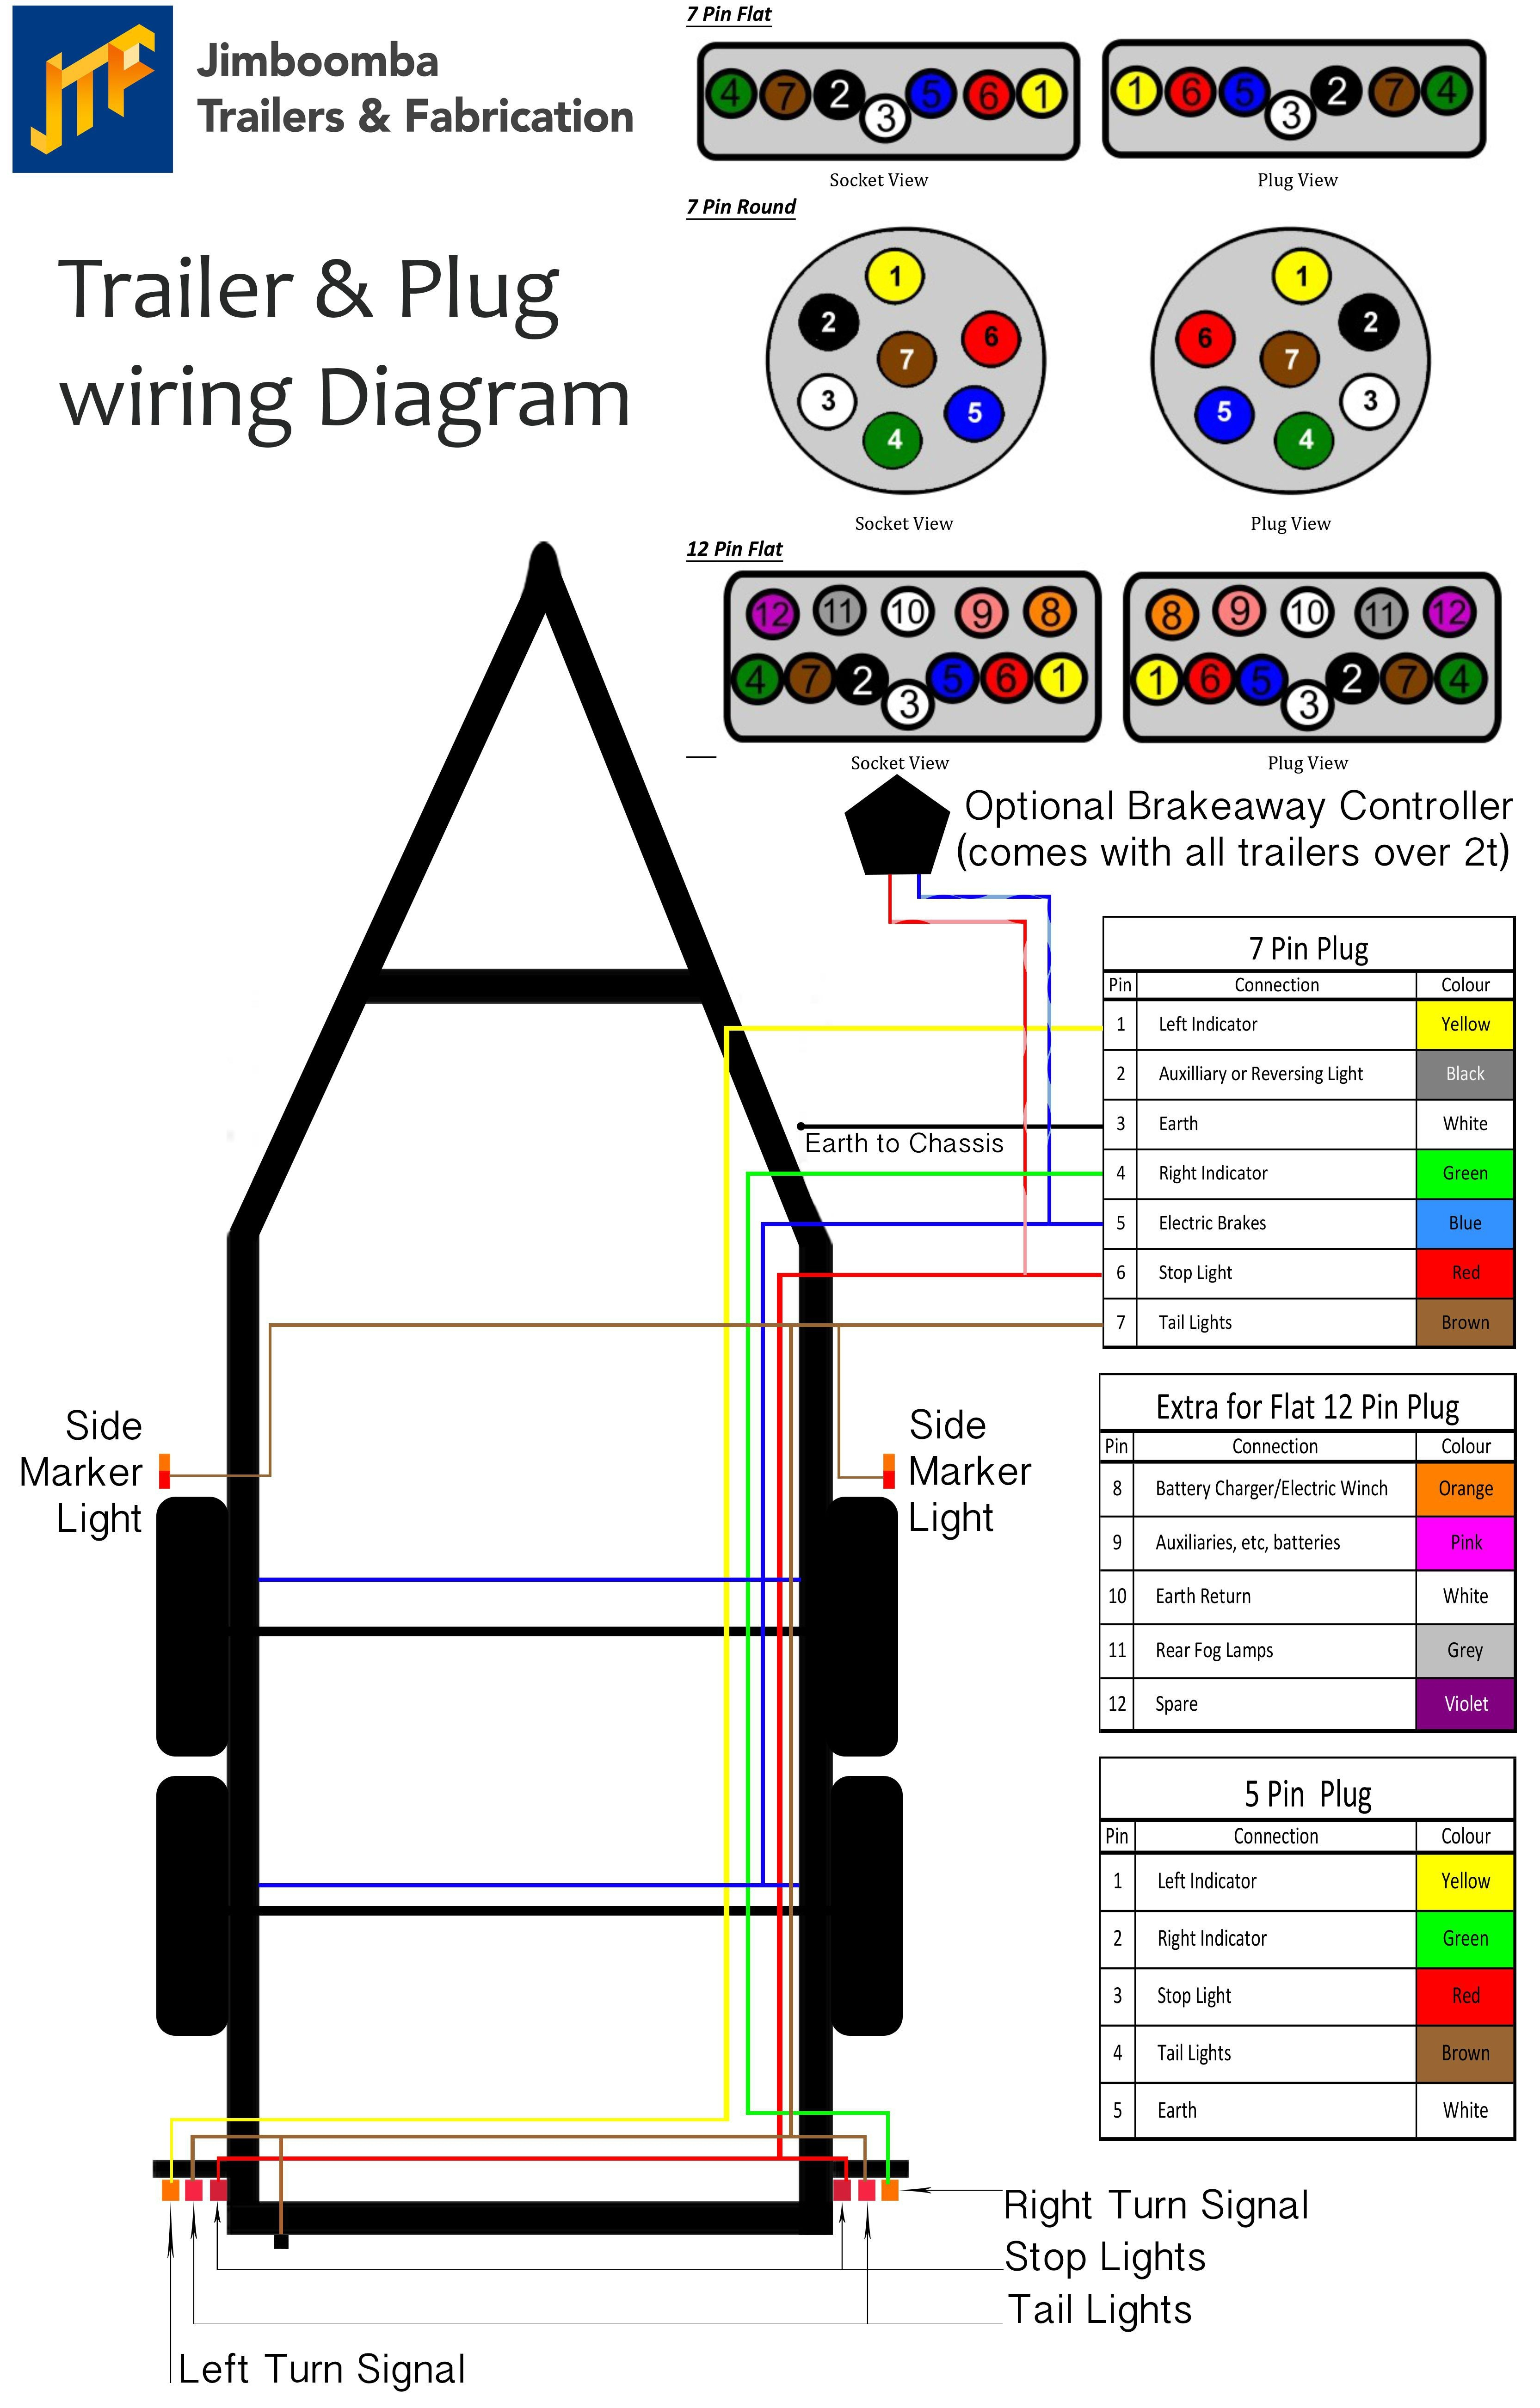 5 Pin Trailer Wiring Harness - Wiring Diagram Explained - 7 Pin Wiring Diagram